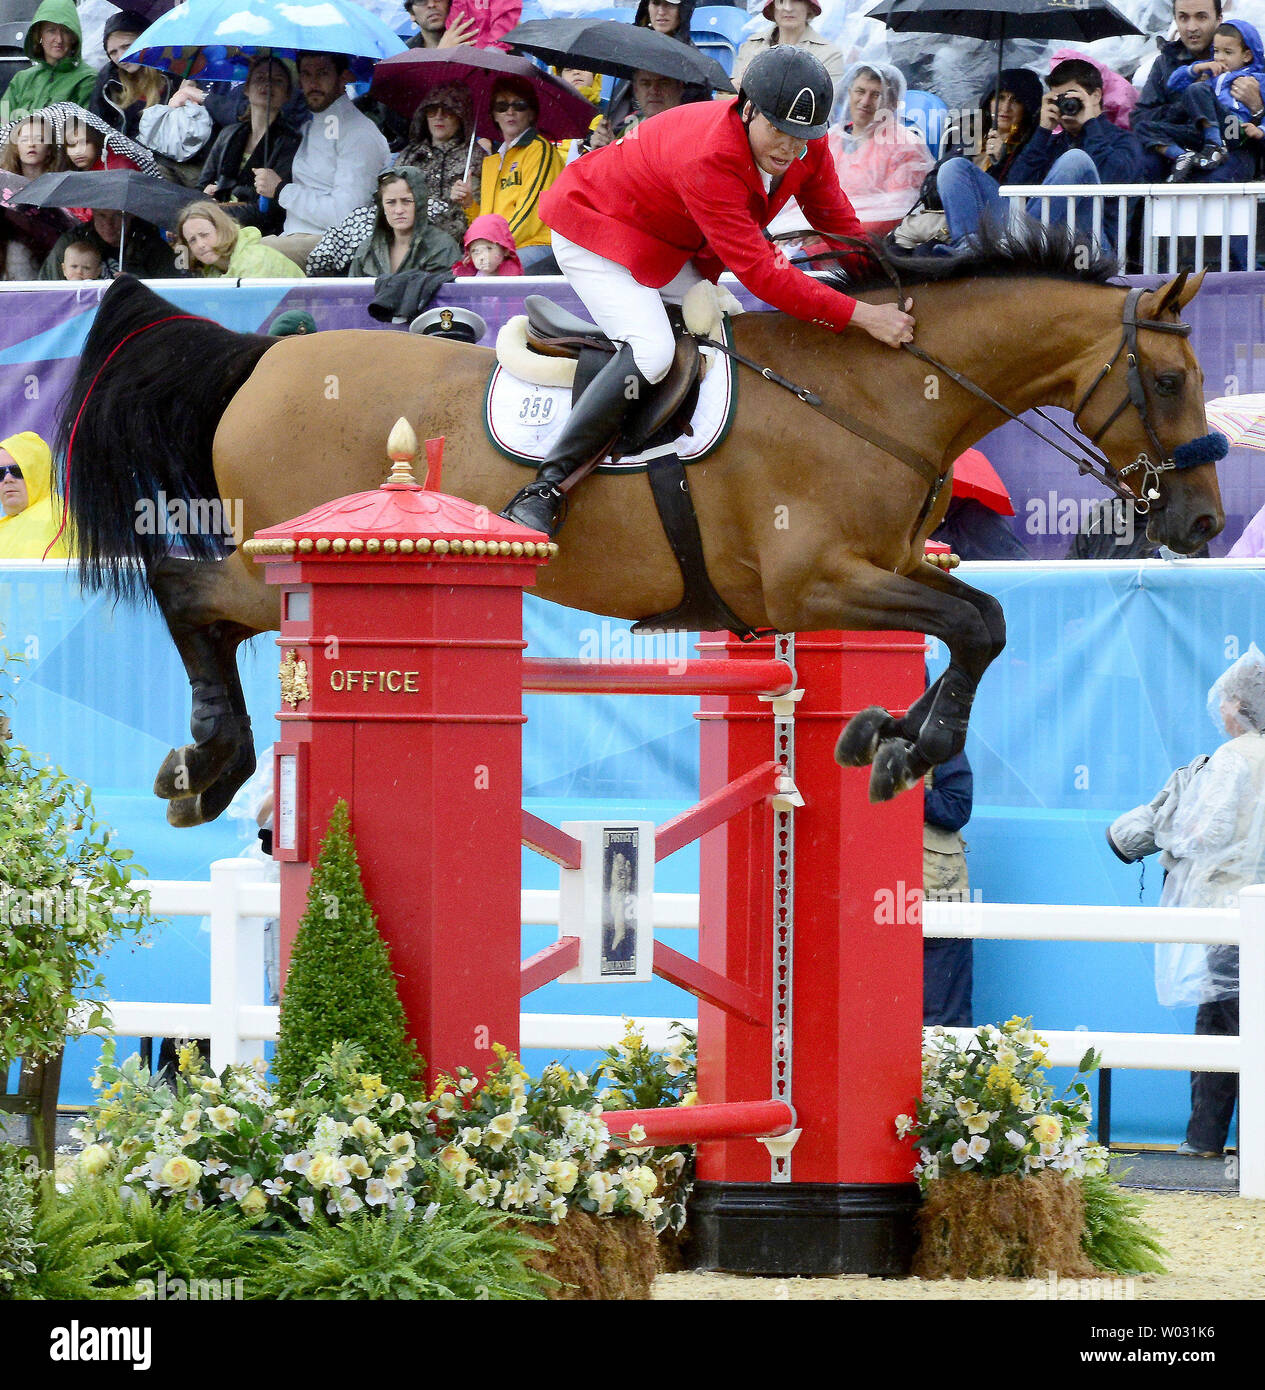 Federico Fernandez of Mexico, riding Victoria, competes in the Equestrian Individual Jumping qualifying competition at the London 2012 Summer Olympics on August 5, 2012 in London.   UPI/Ron Sachs Stock Photo